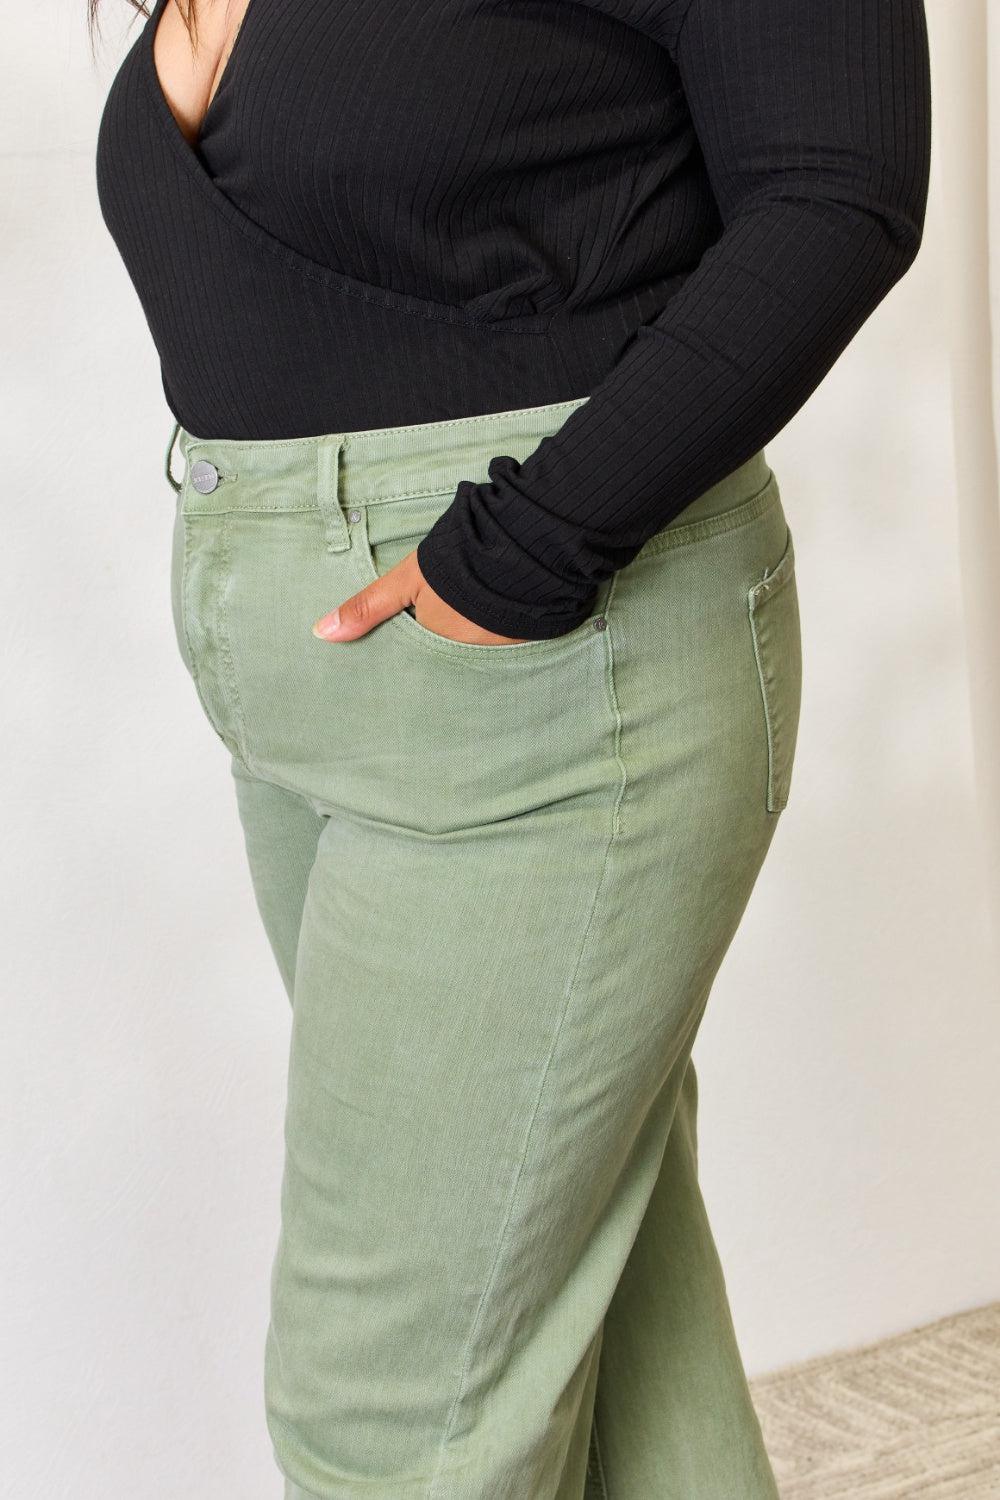 a woman in a black top and green pants